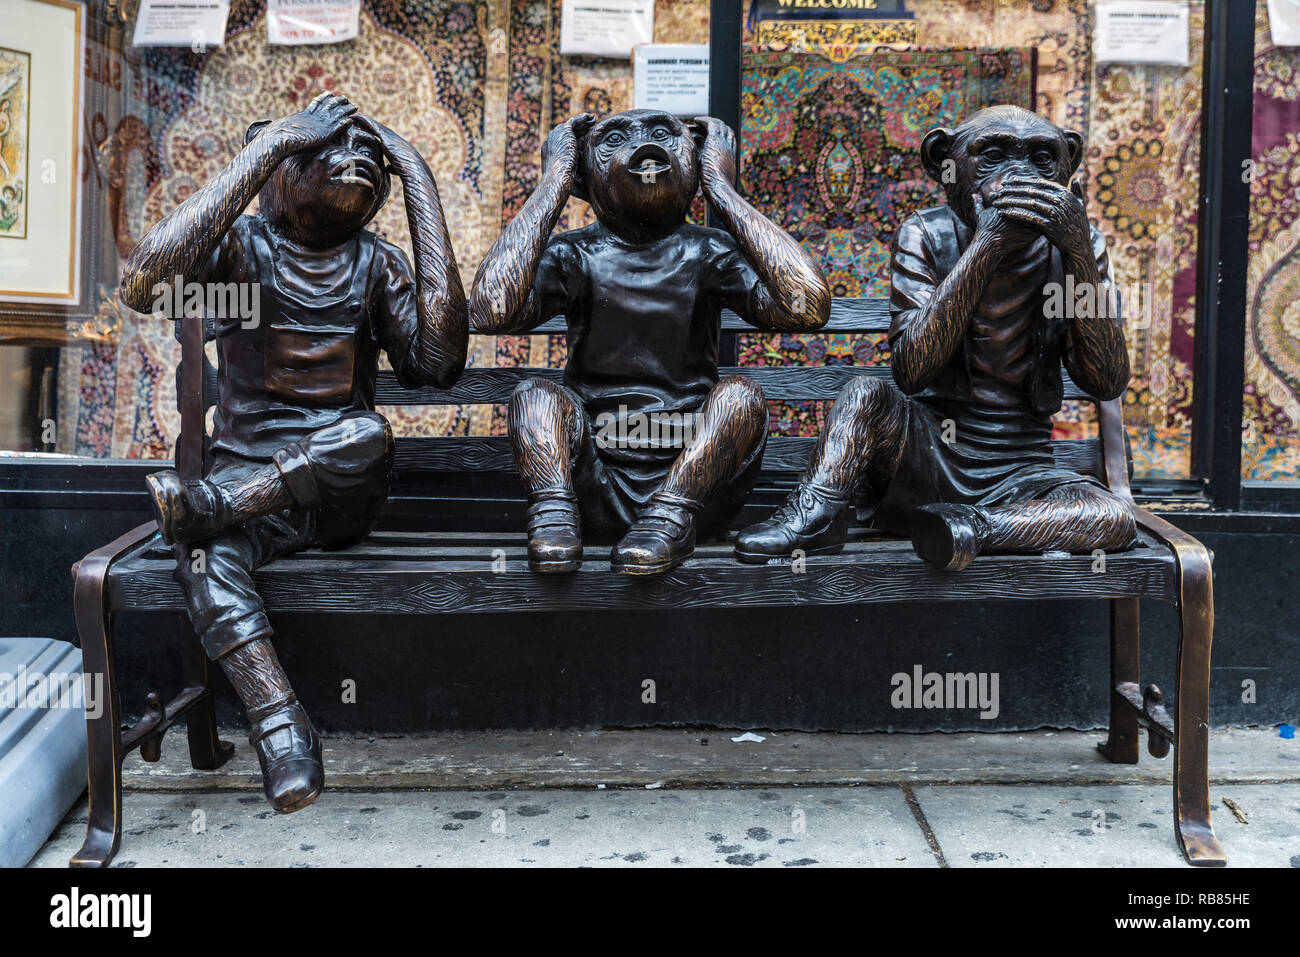 New York City, USA - July 25, 2018: Statue of Three wise monkeys, embodying the proverbial principle 'see no evil, hear no evil, speak no evil', on a  Stock Photo